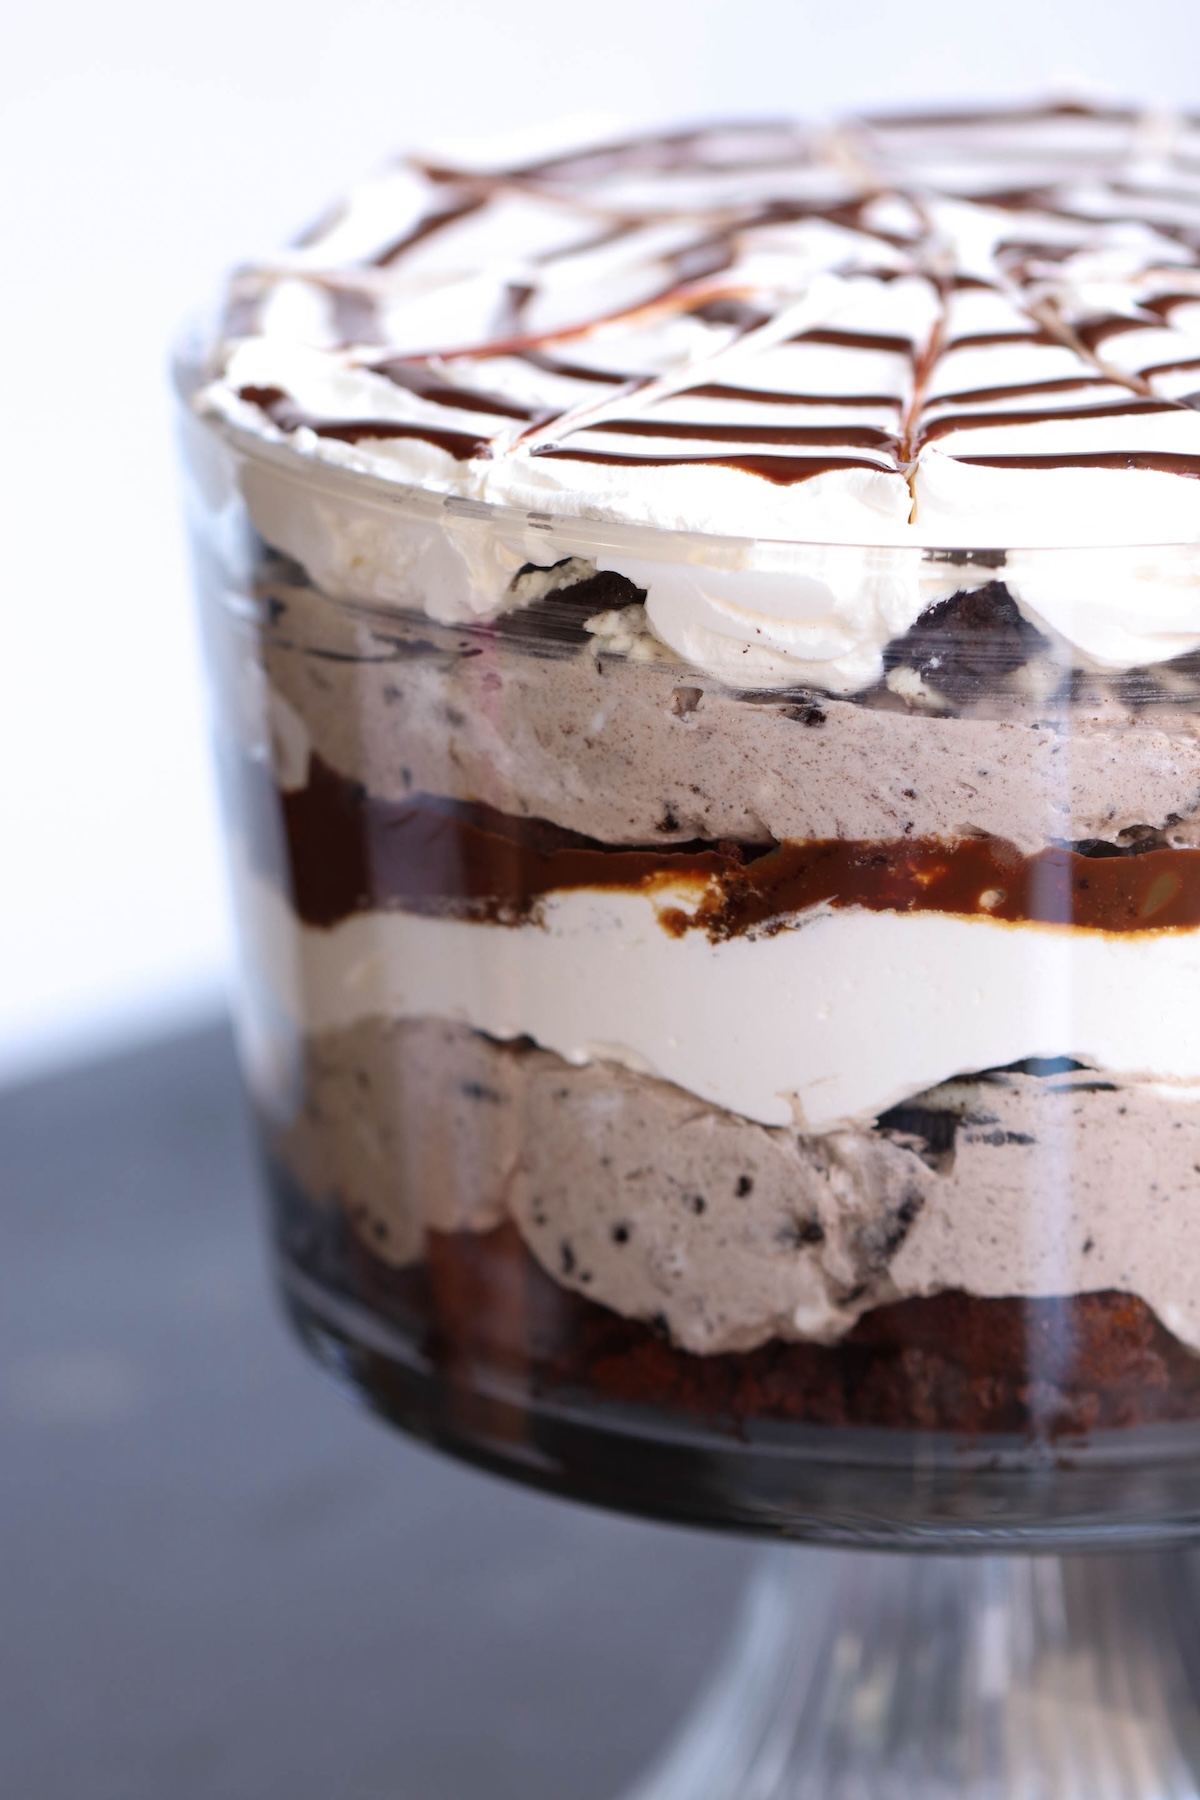 A layered trifle in a glass bowl, consisting of whipped cream, chocolate pudding, cake pieces, and a chocolate drizzle on top.